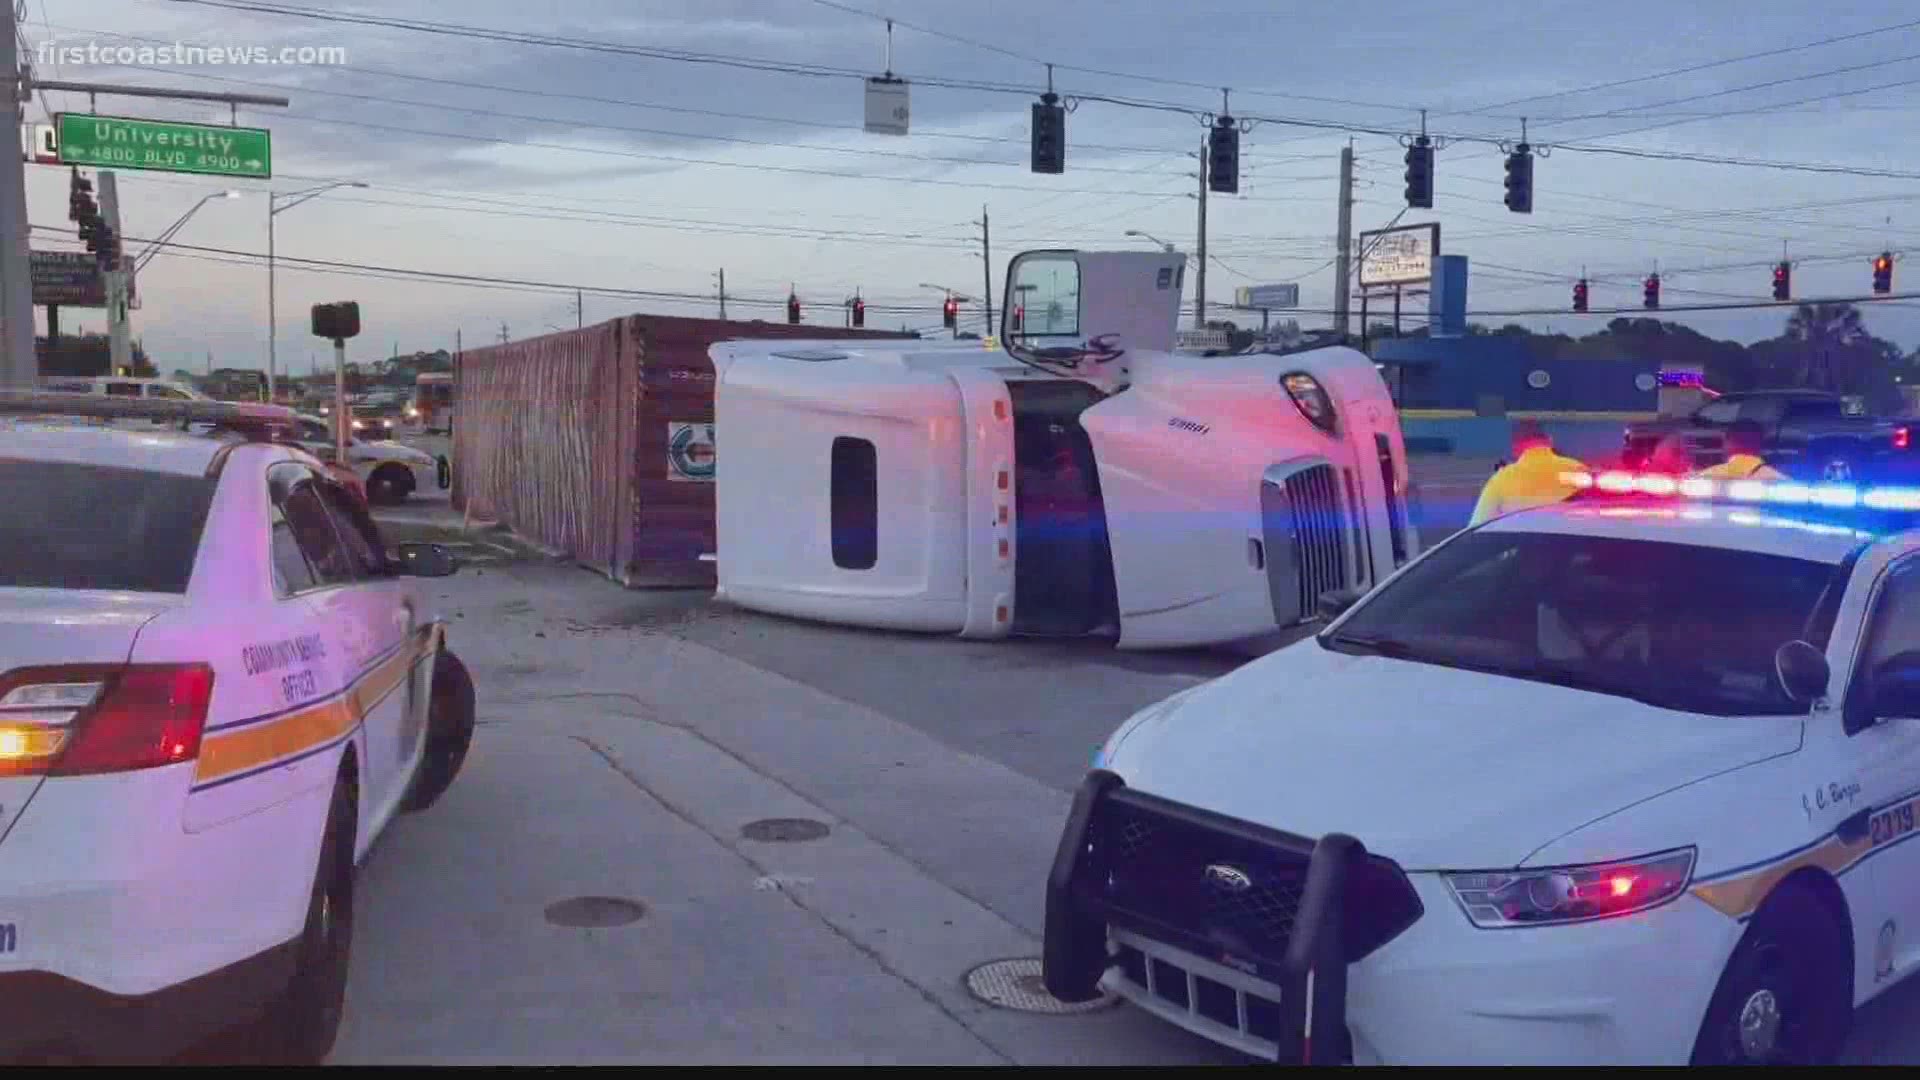 Two weeks ago, on March 12, a similar incident involving an overturned semi-truck happened in the same area.